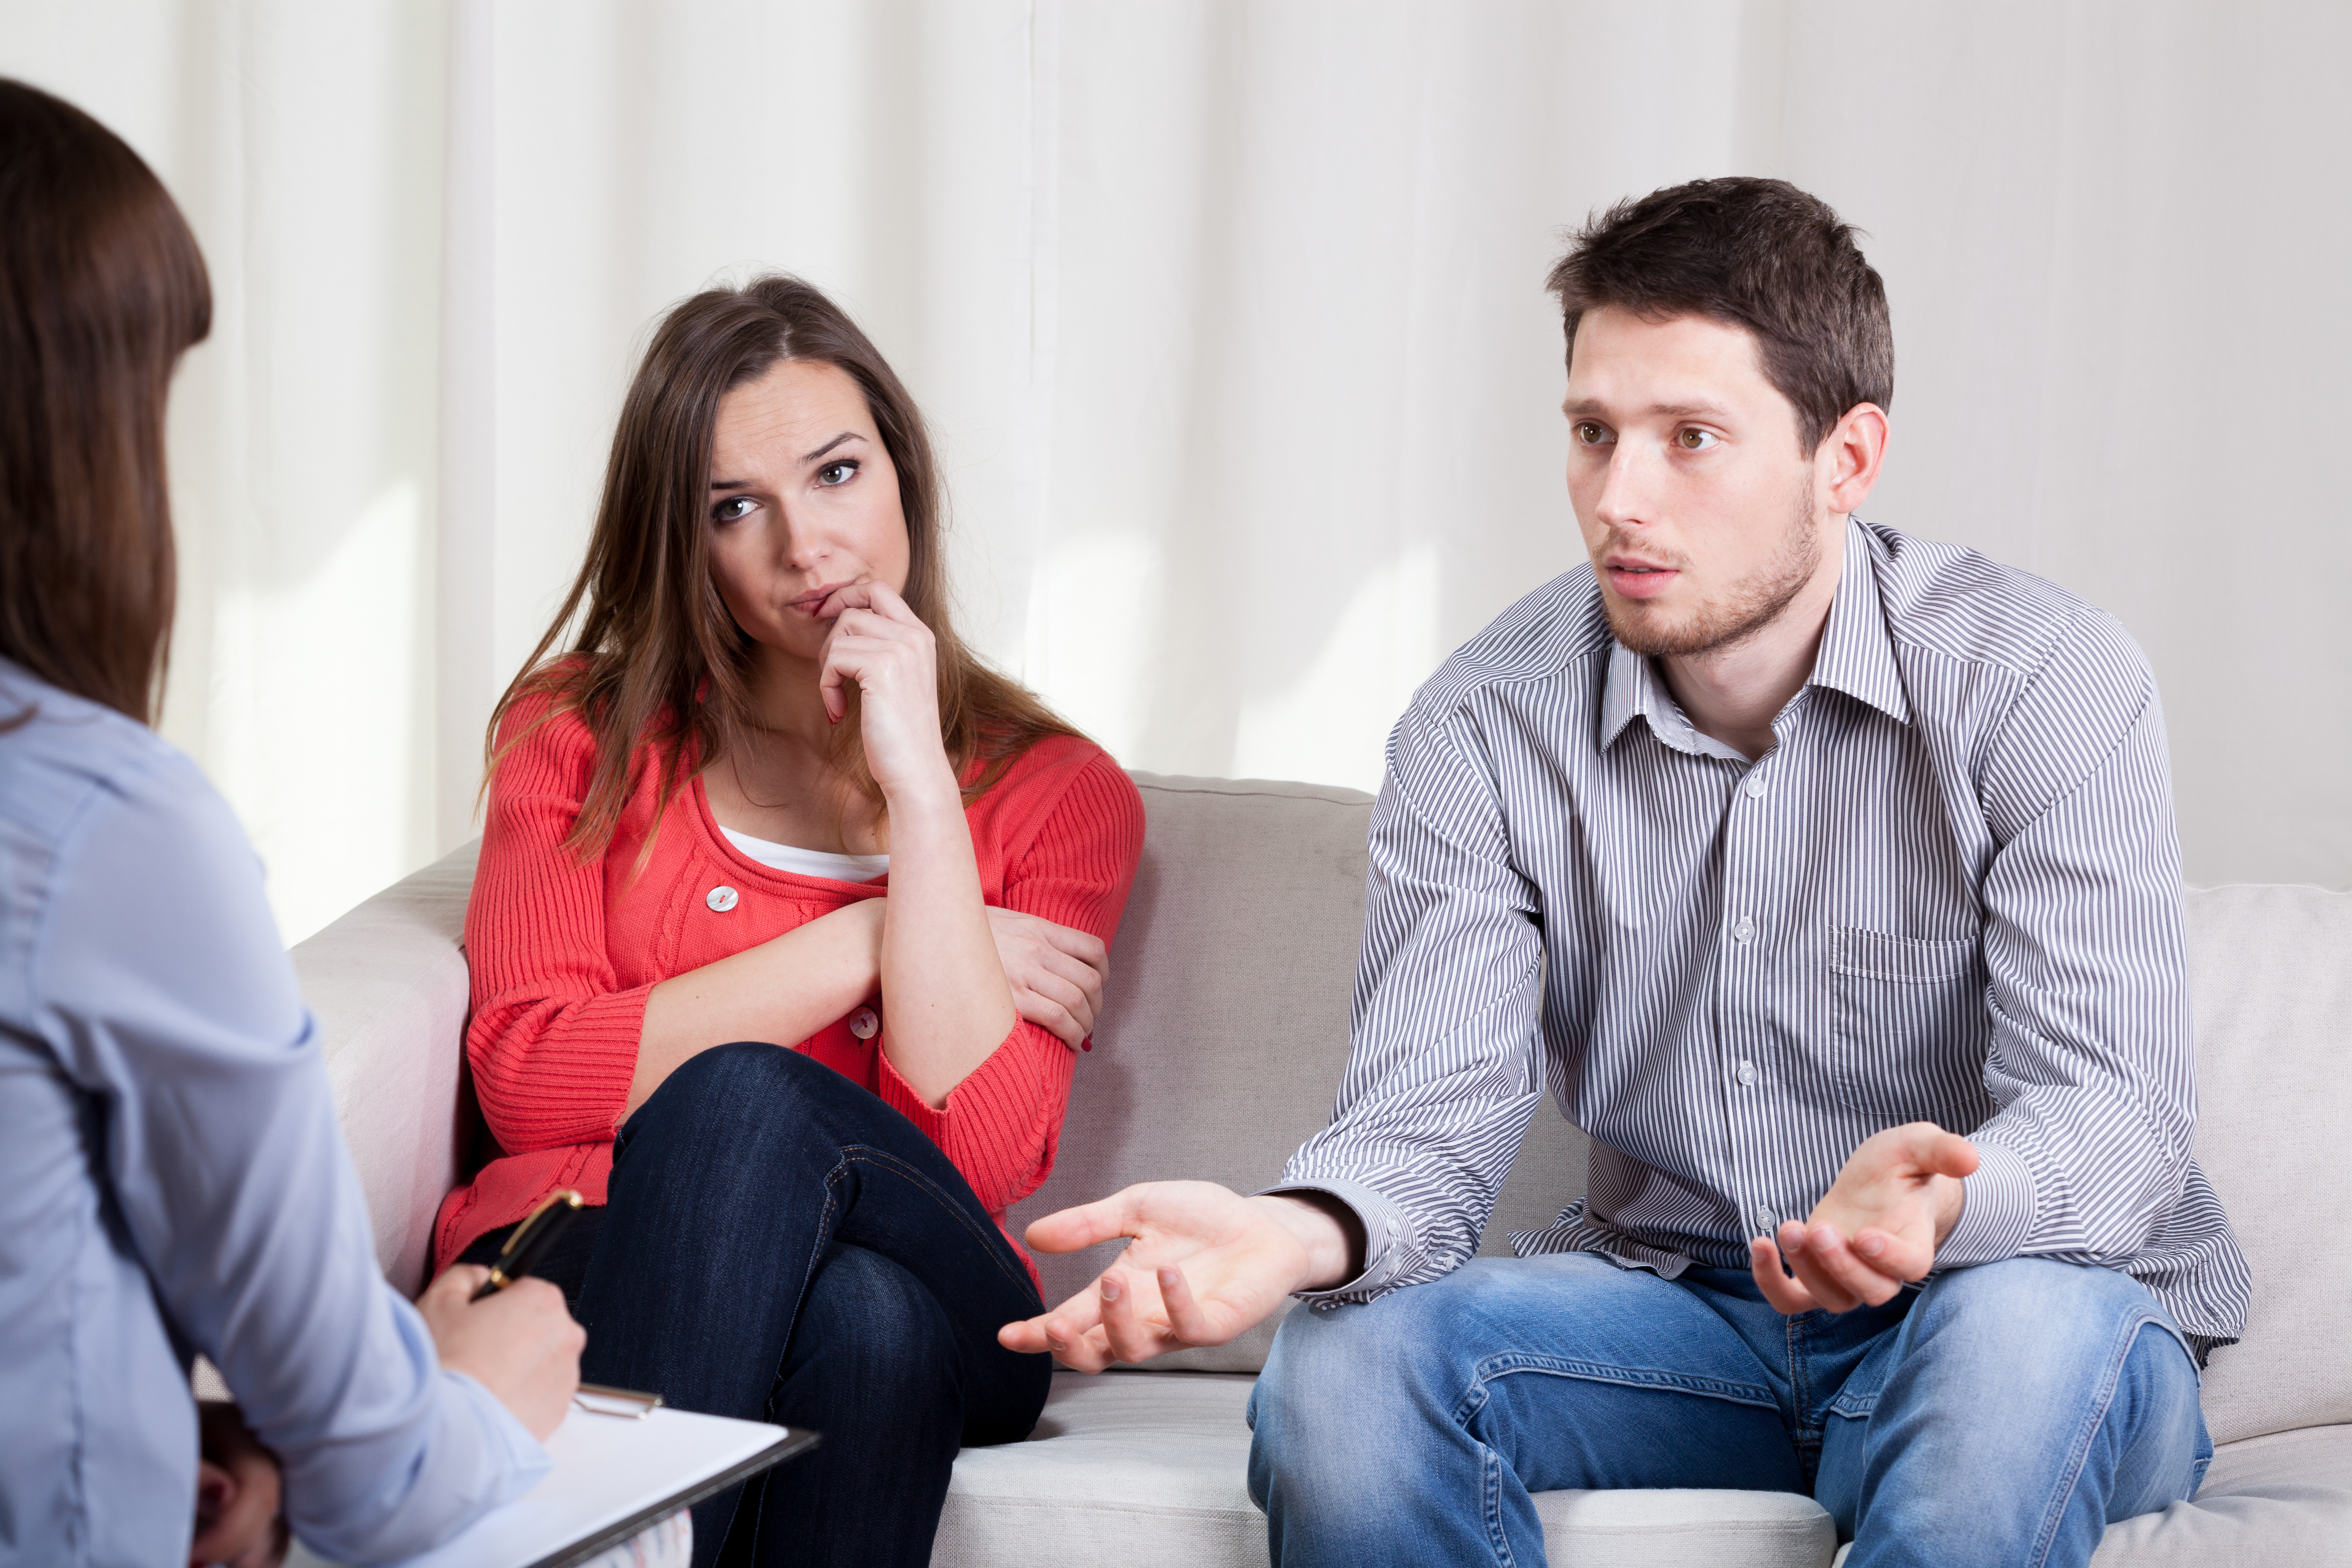 Sad couple is talking to woman | Source: Shutterstock.com